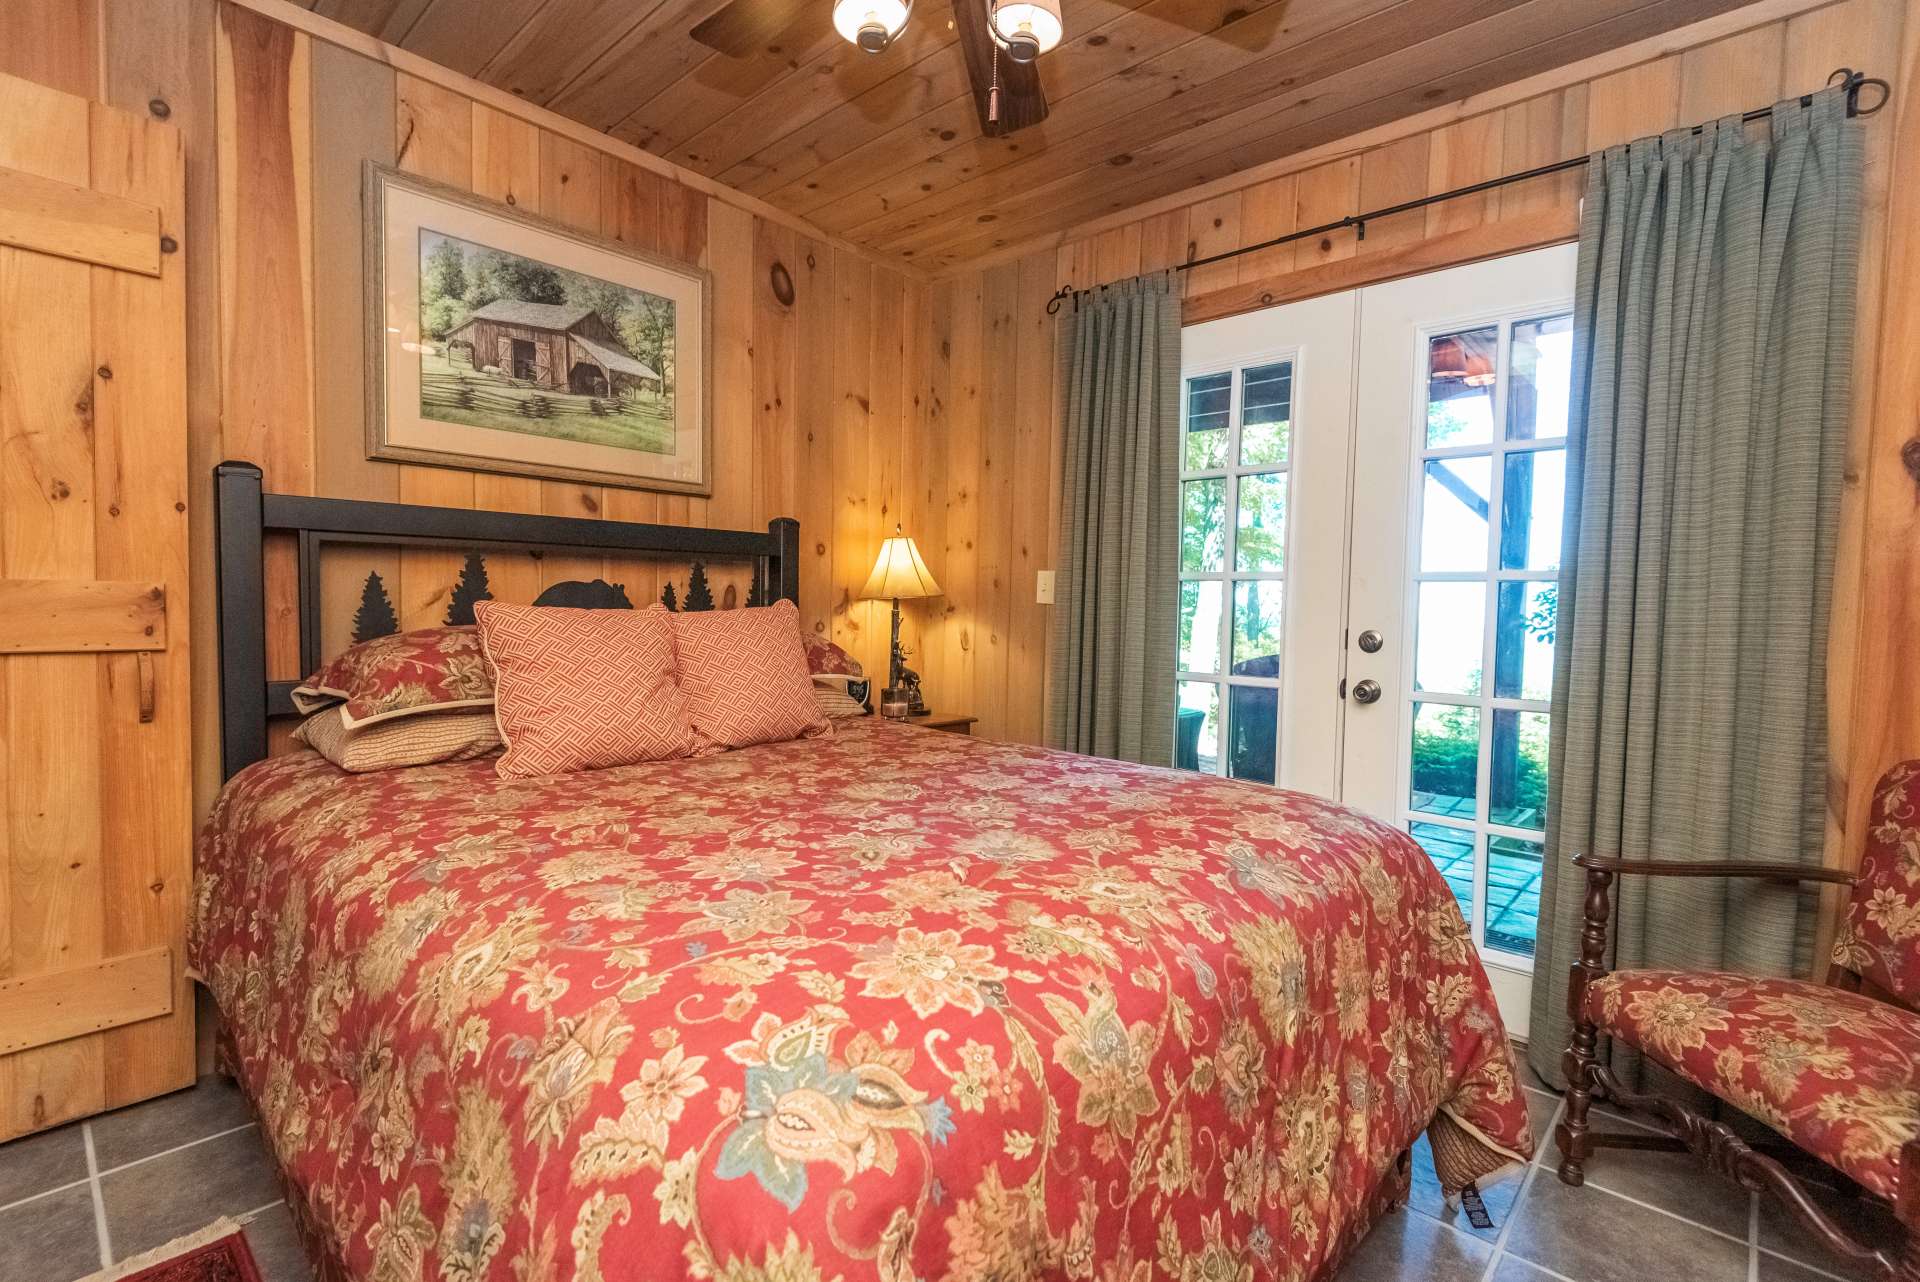 Lower level bedroom has French doors leading to the patio and a large walk-in closet.